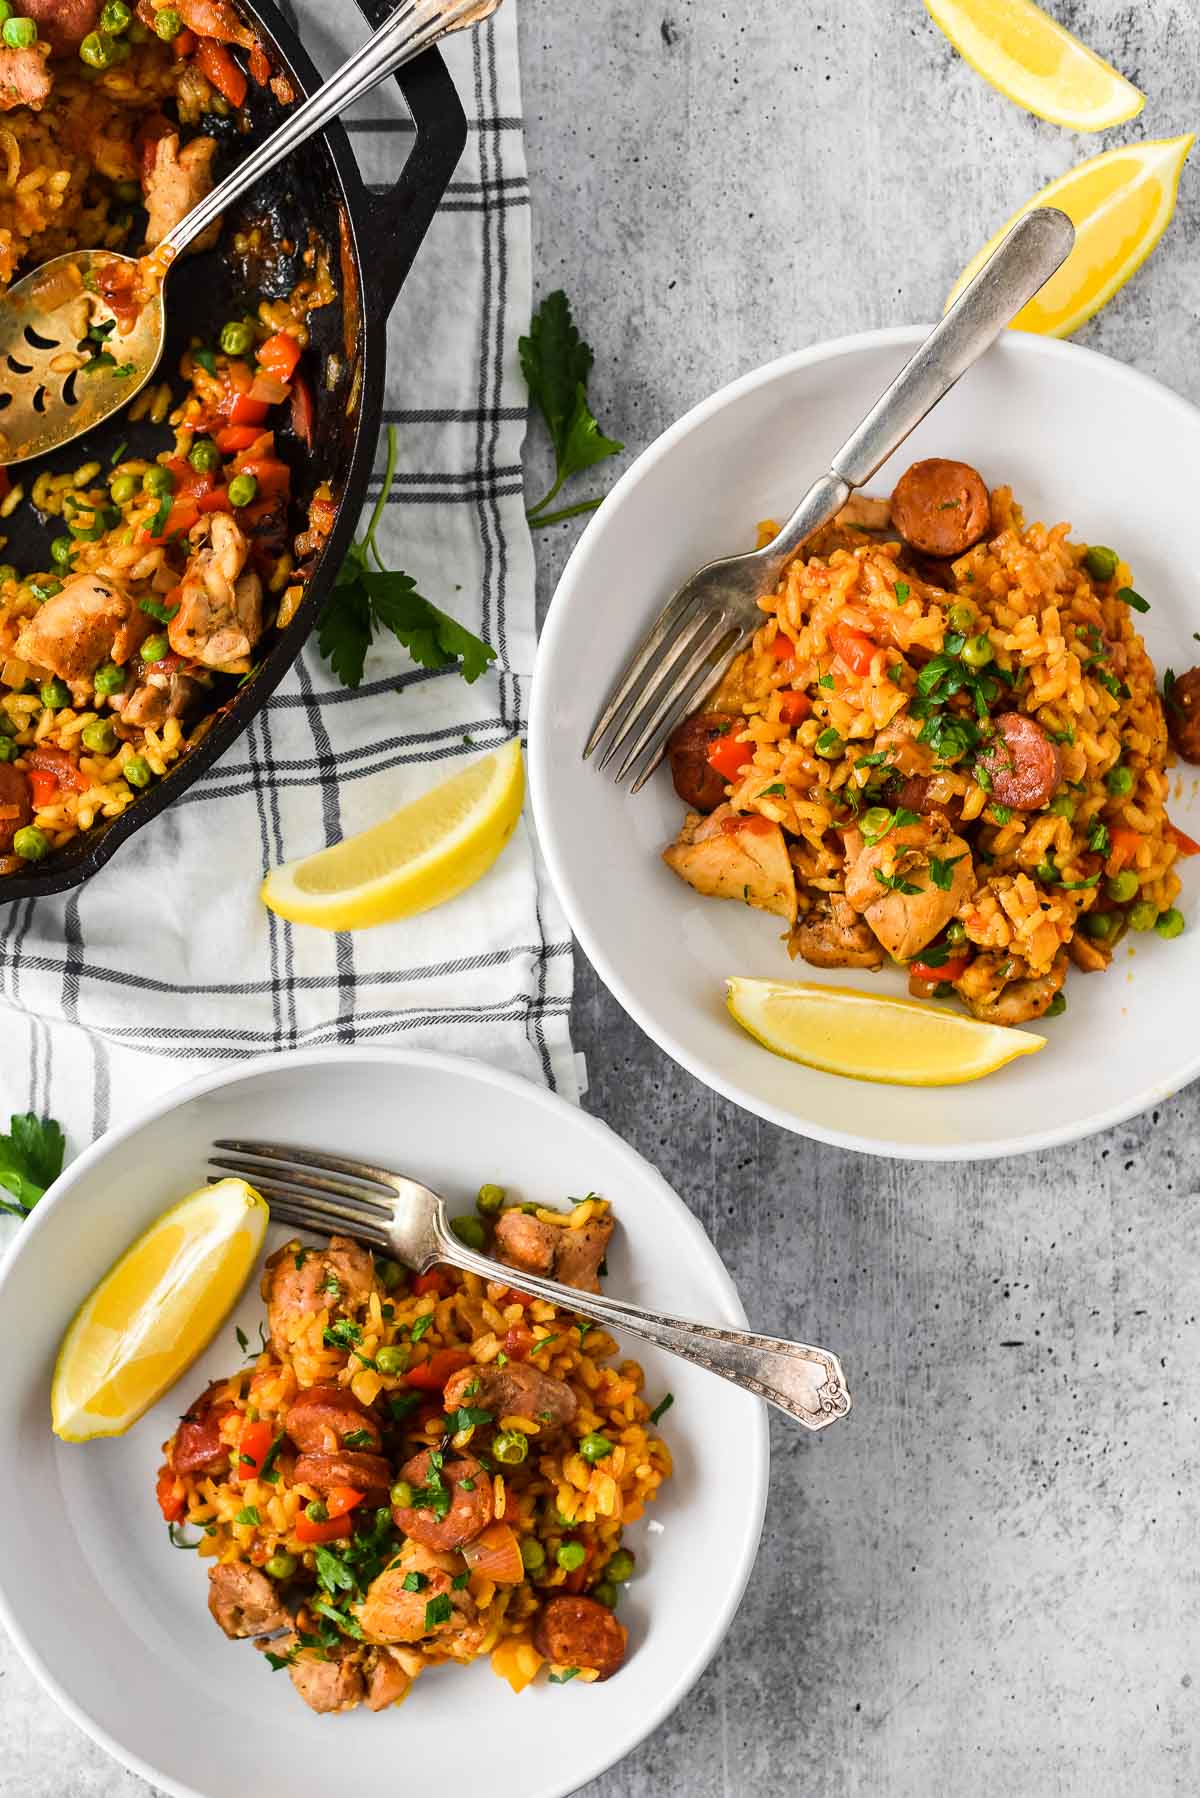 two bowls with paella next to cast iron skillet, lemon slices and forks arranged around